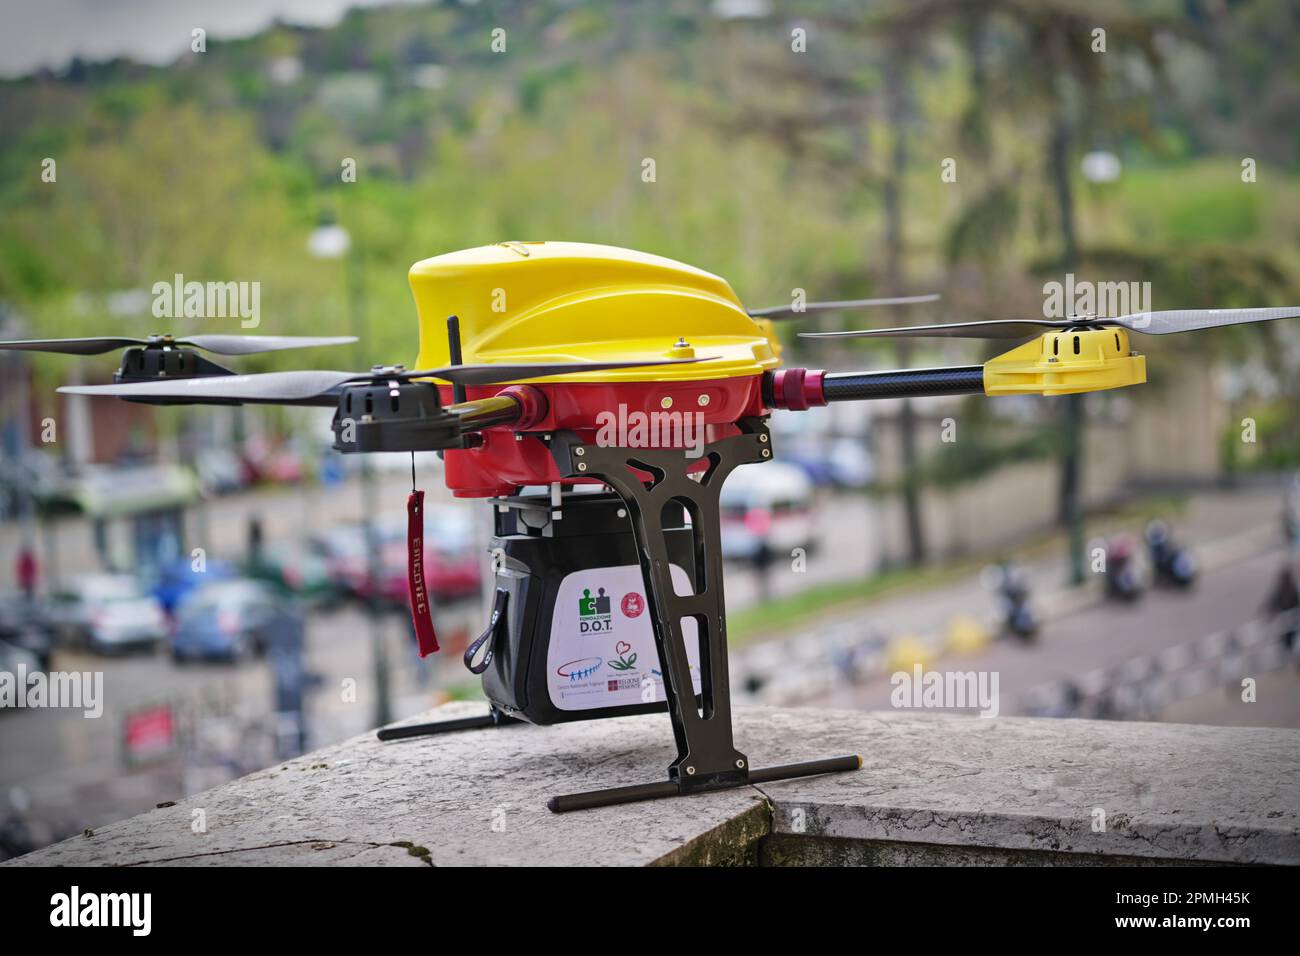 A drone used in healthcare, specially designed to transport biological material and organs for transplantation. Turin, Italy - April 2023 Stock Photo